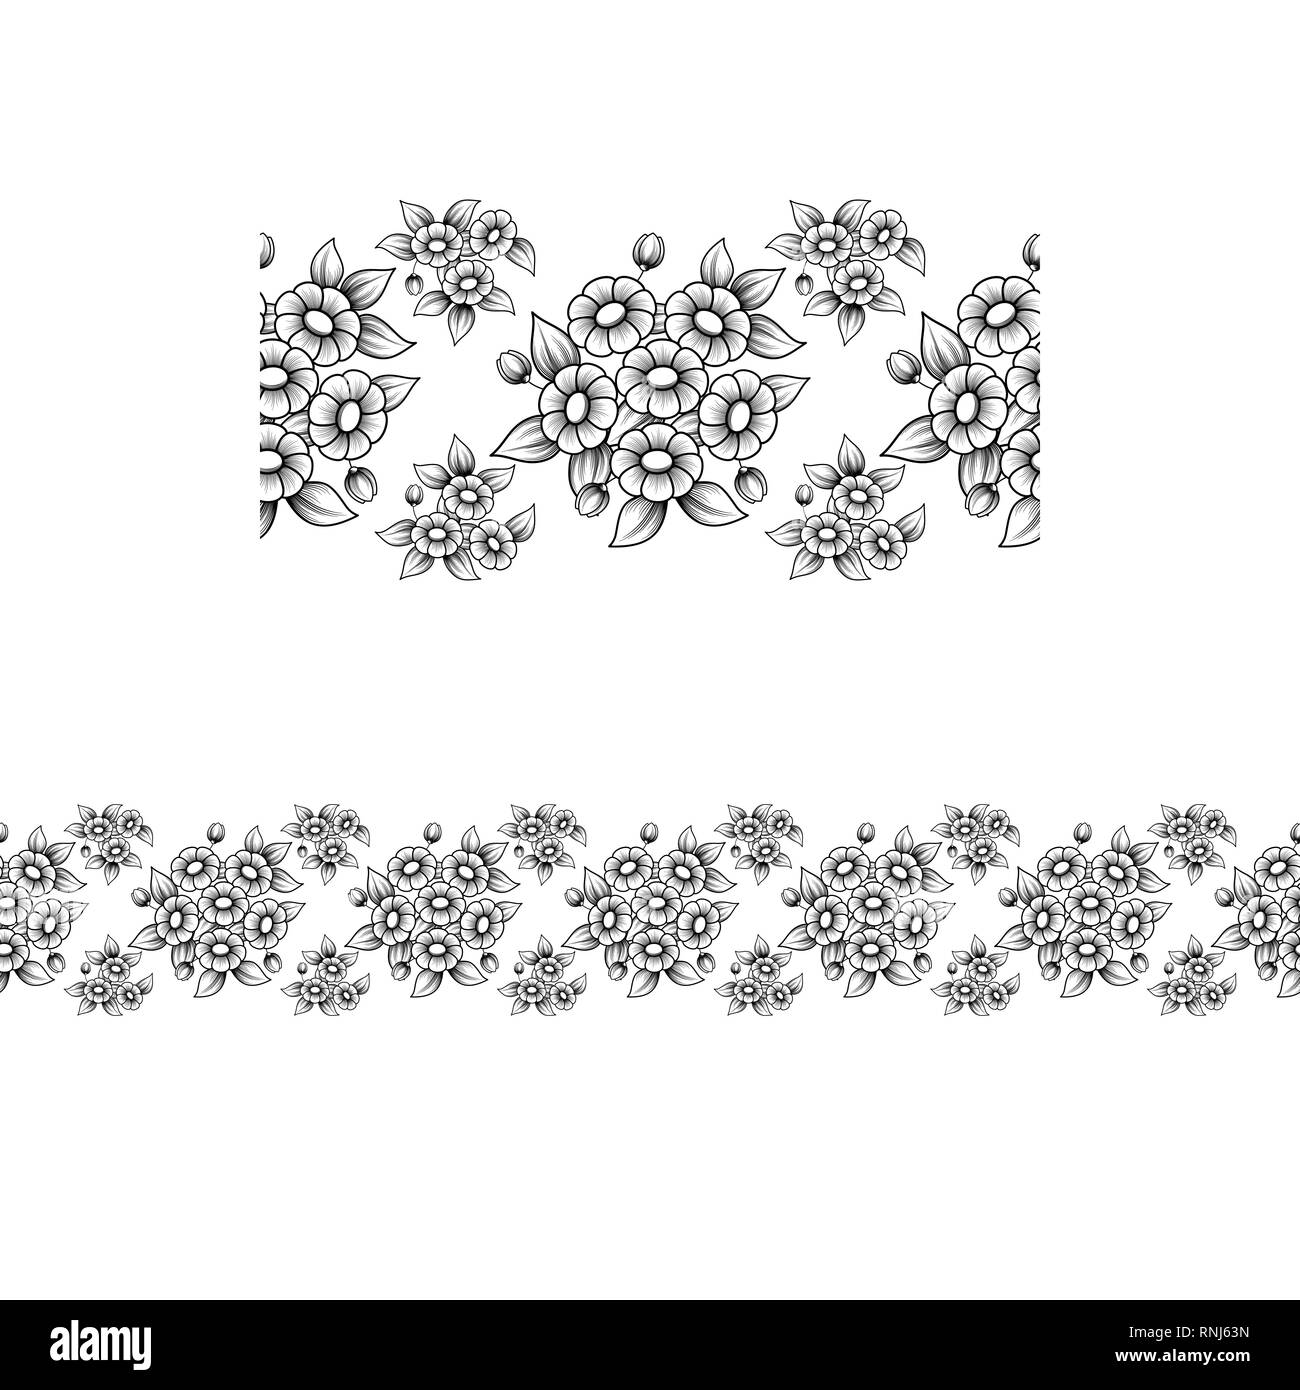 Black outline flowers pattern isolated on white background Stock Vector